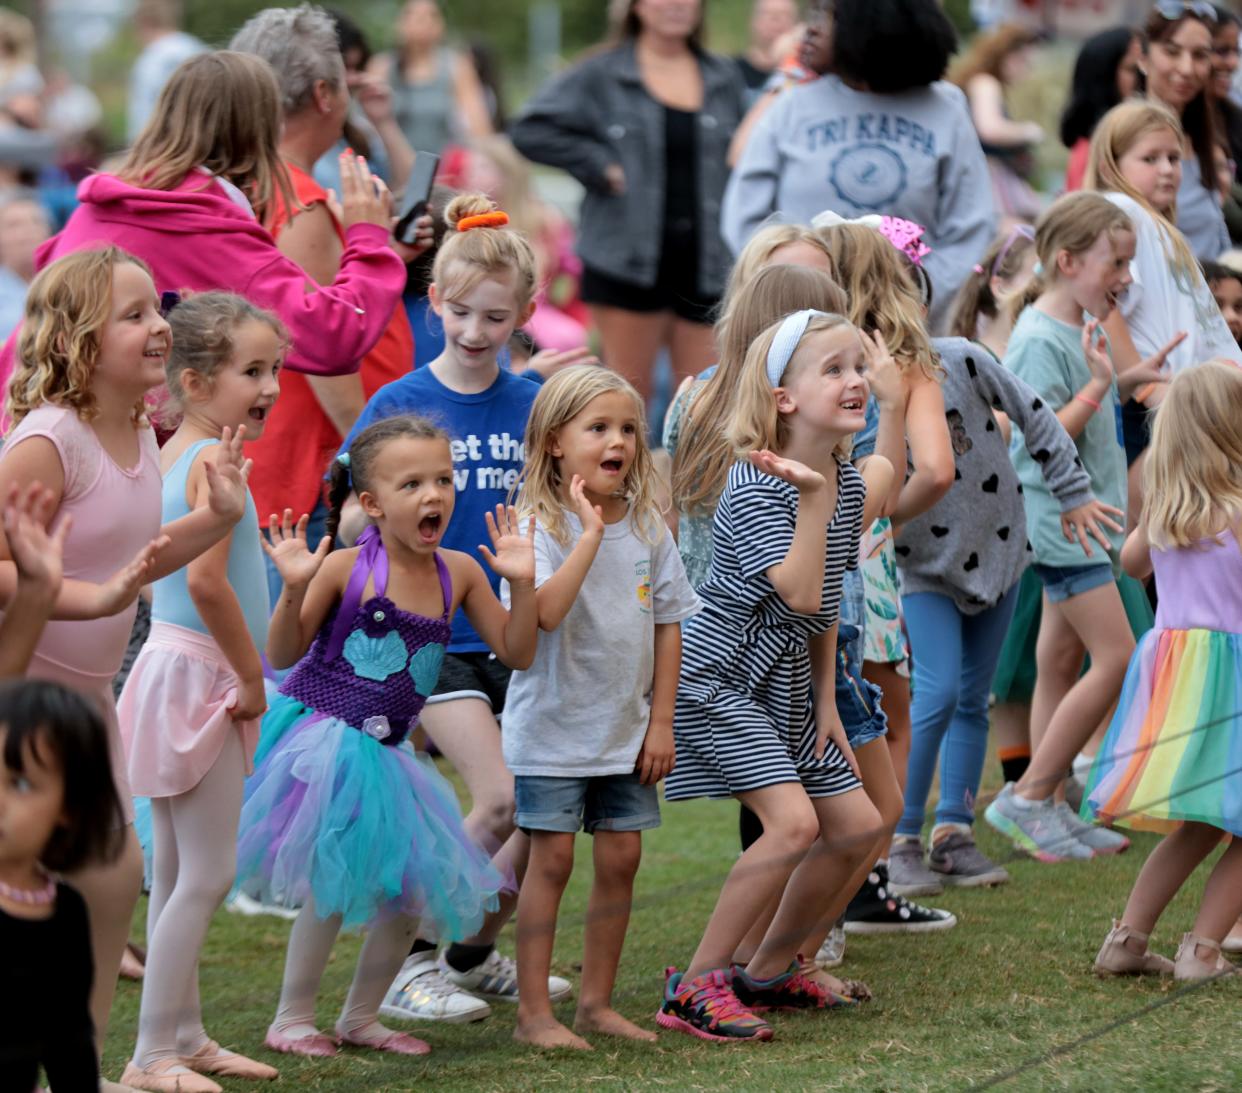 Audience members are encouraged to dance Sept. 15 before Oklahoma City Ballet's "Ballet Under the Stars" at Scissortail Park.